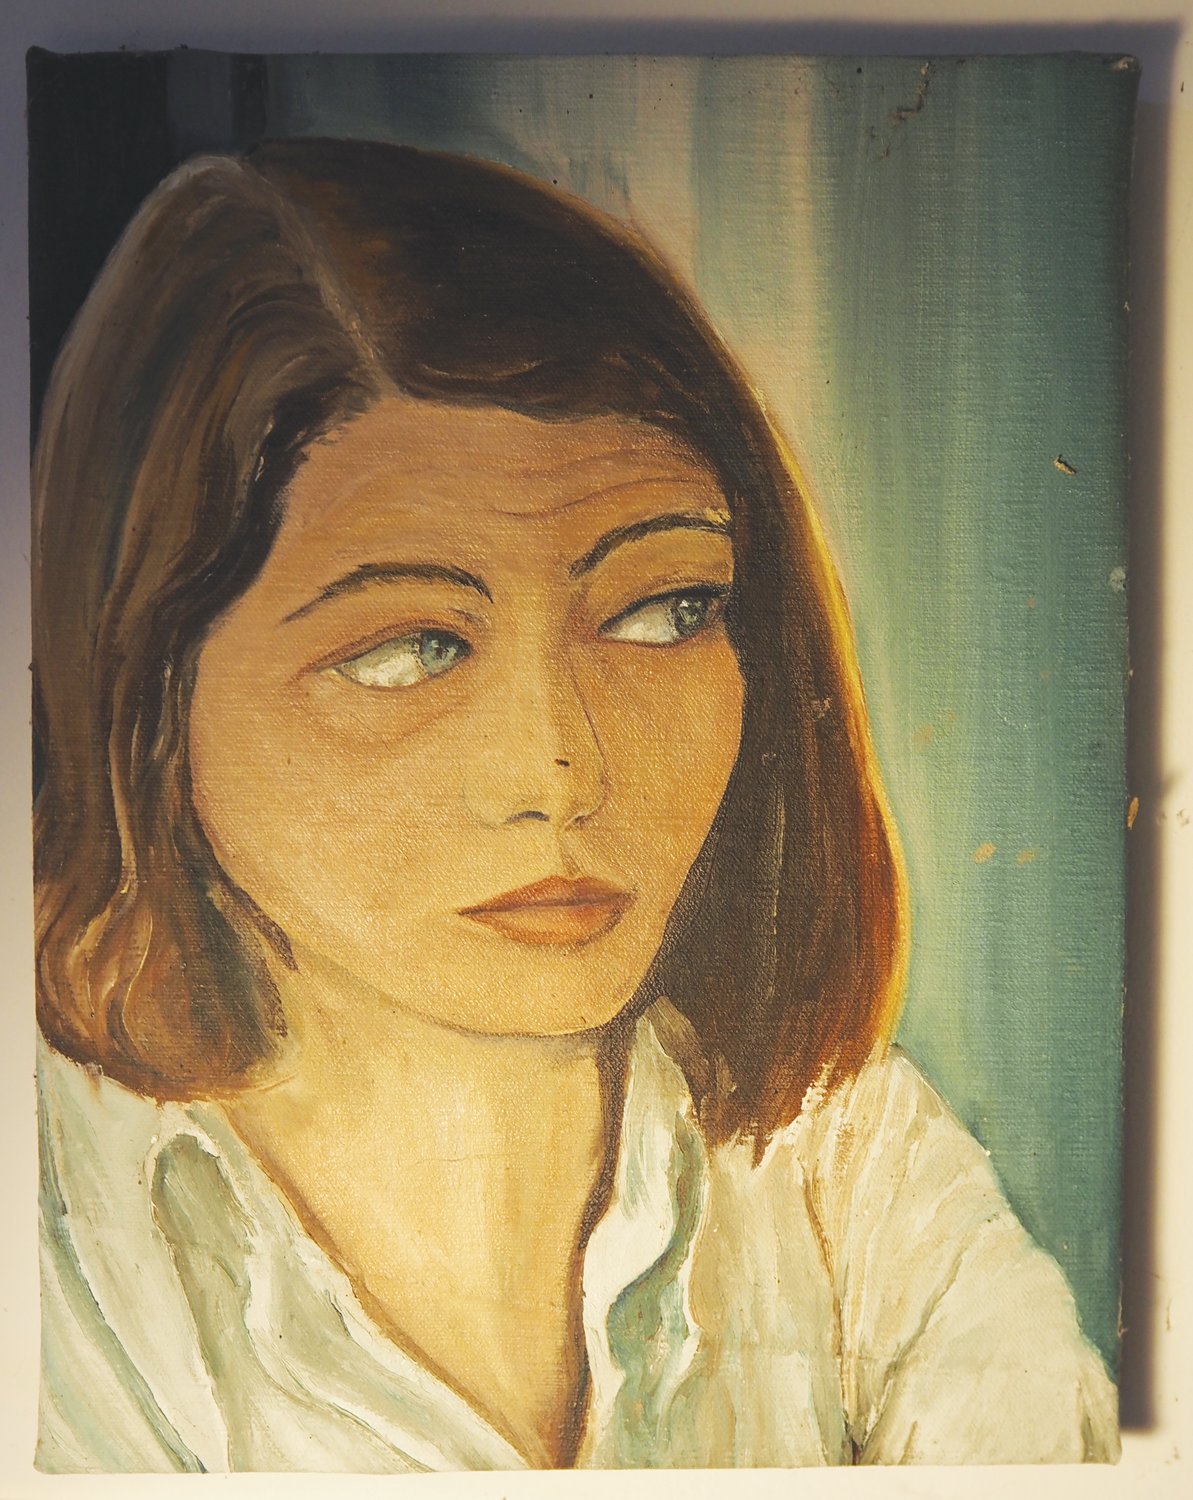 Sharon Squire’s first and only self-portrait.